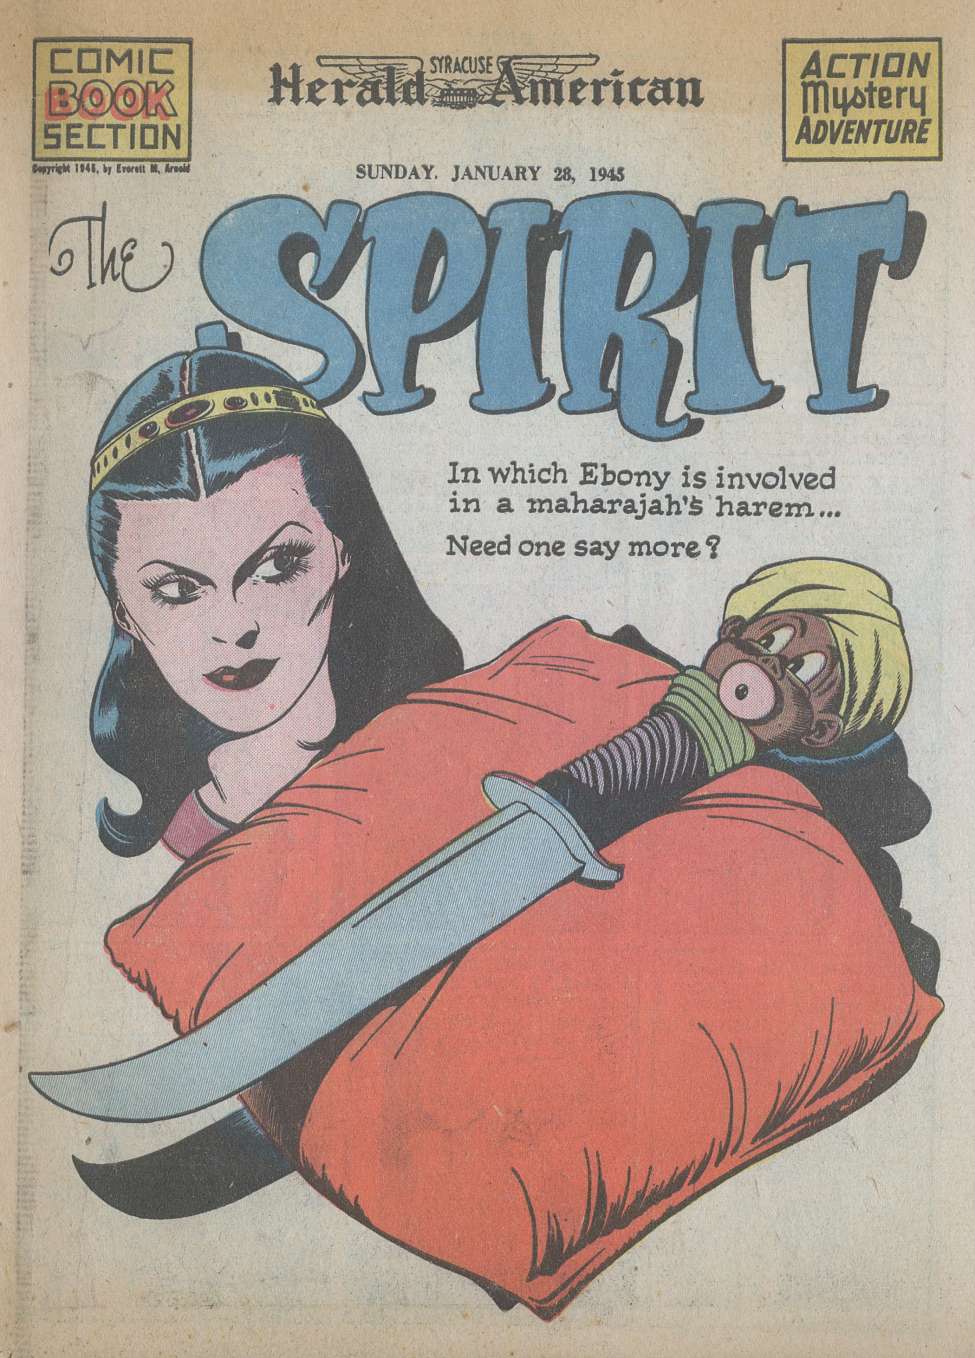 Comic Book Cover For The Spirit (1945-01-28) - Syracuse Herald American - Version 2